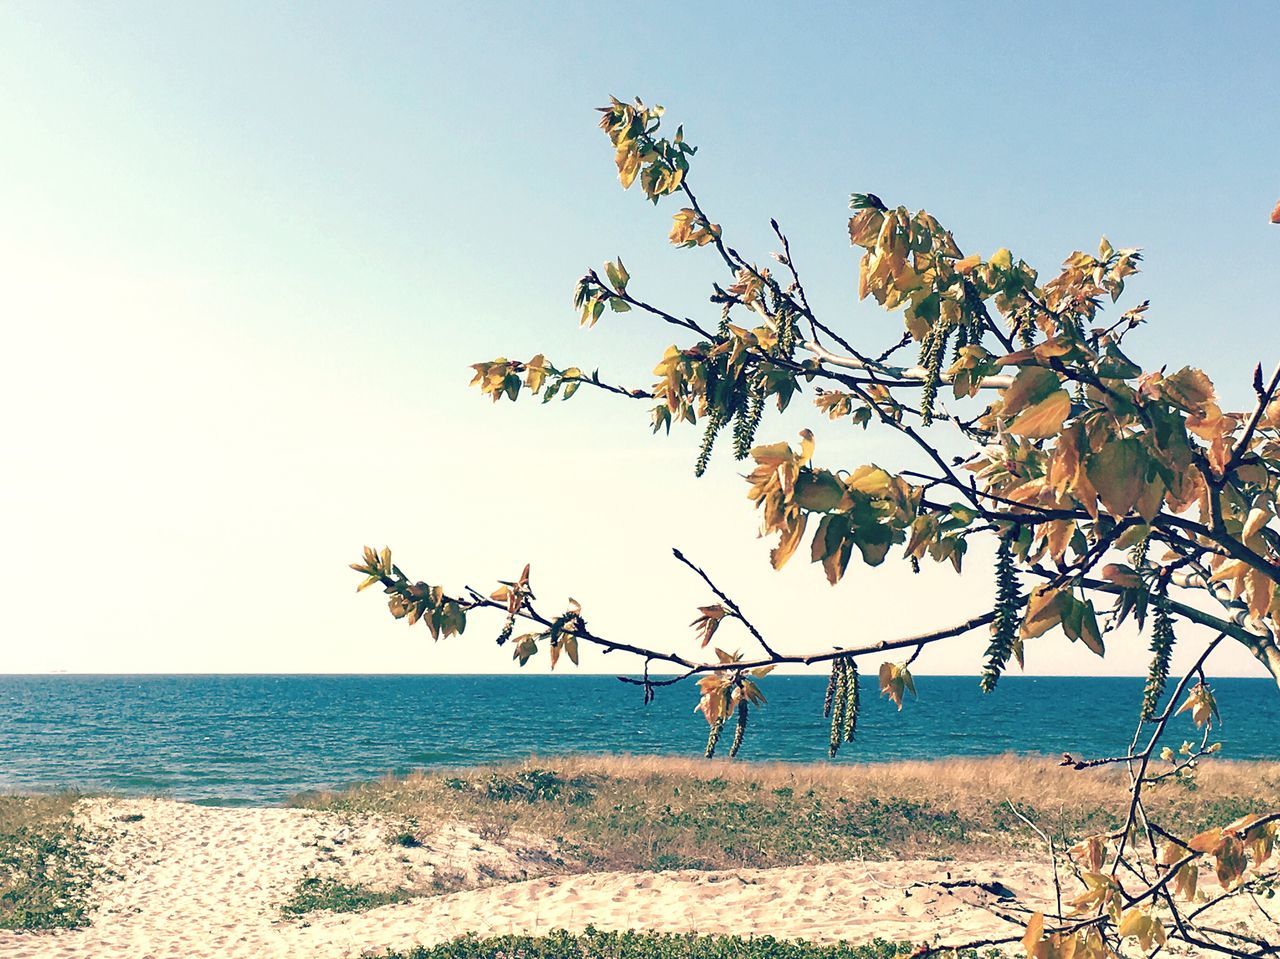 clear sky, sea, horizon over water, branch, water, nature, tranquility, beauty in nature, tree, tranquil scene, scenics, growth, beach, copy space, blue, sky, plant, shore, no people, day